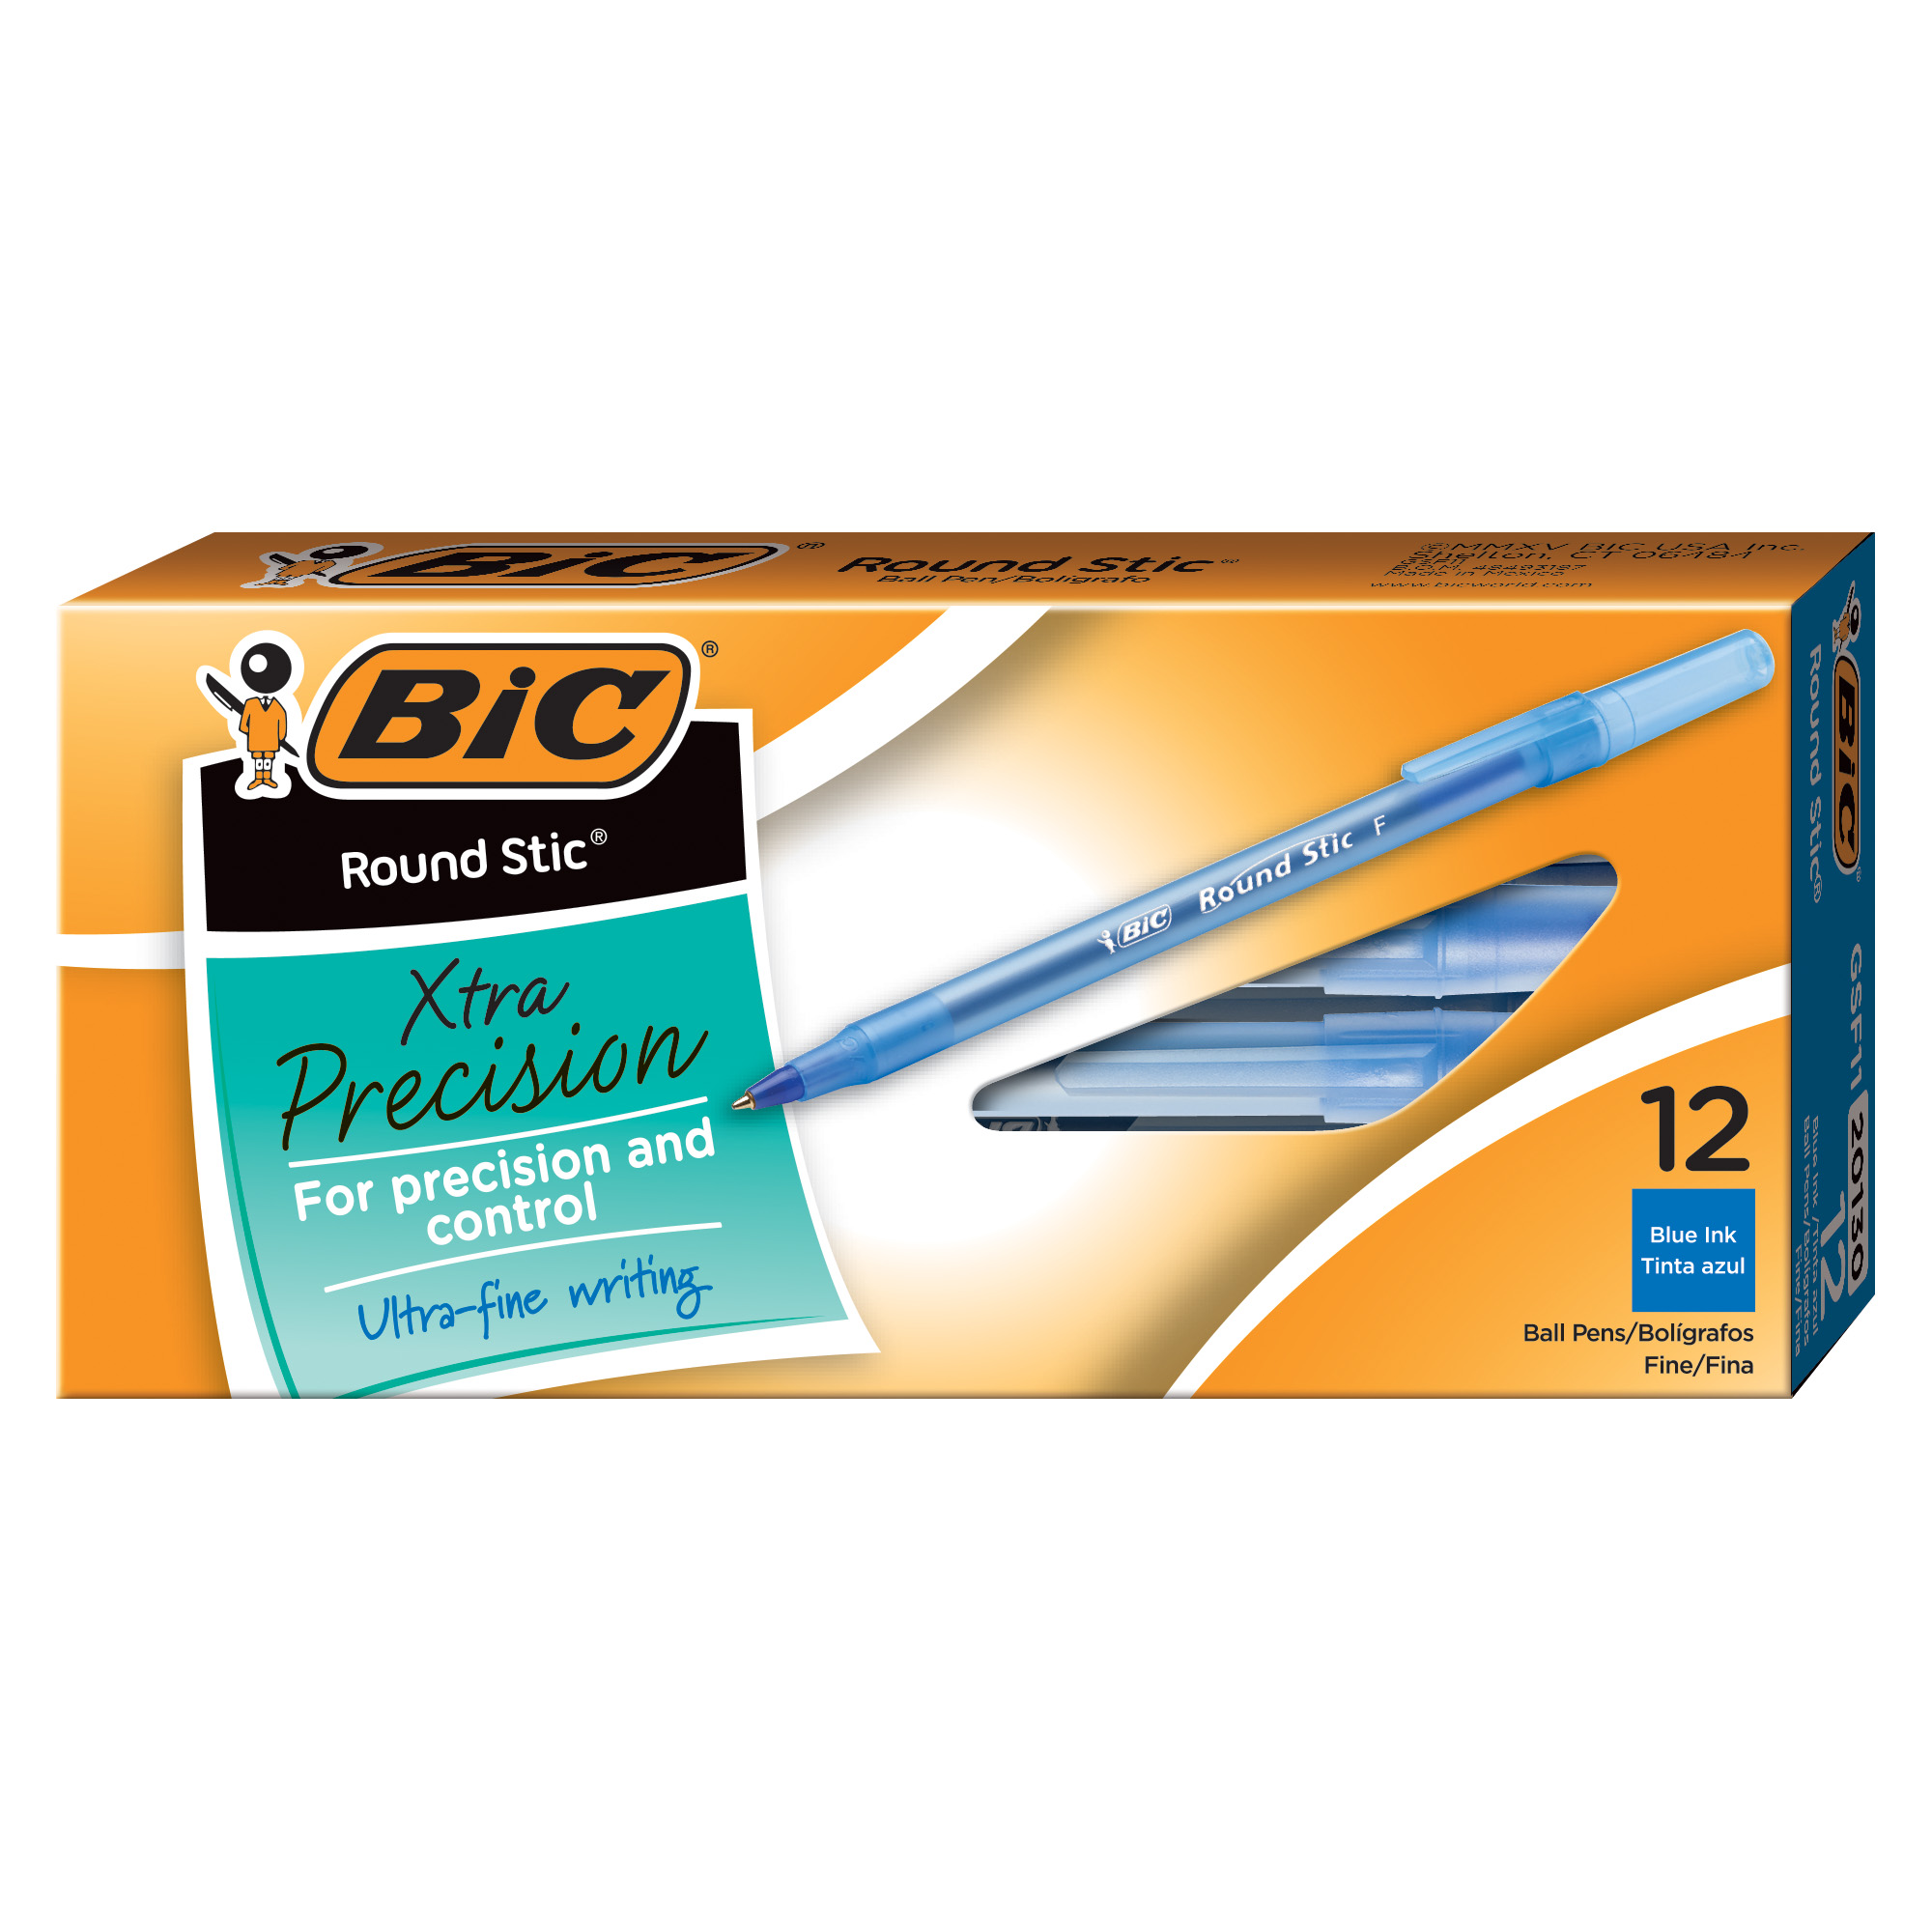 BIC Round Stic® Xtra Precision Ball Point Pens, Fine Point (0.8mm), Blue, 12 Pack - image 1 of 7